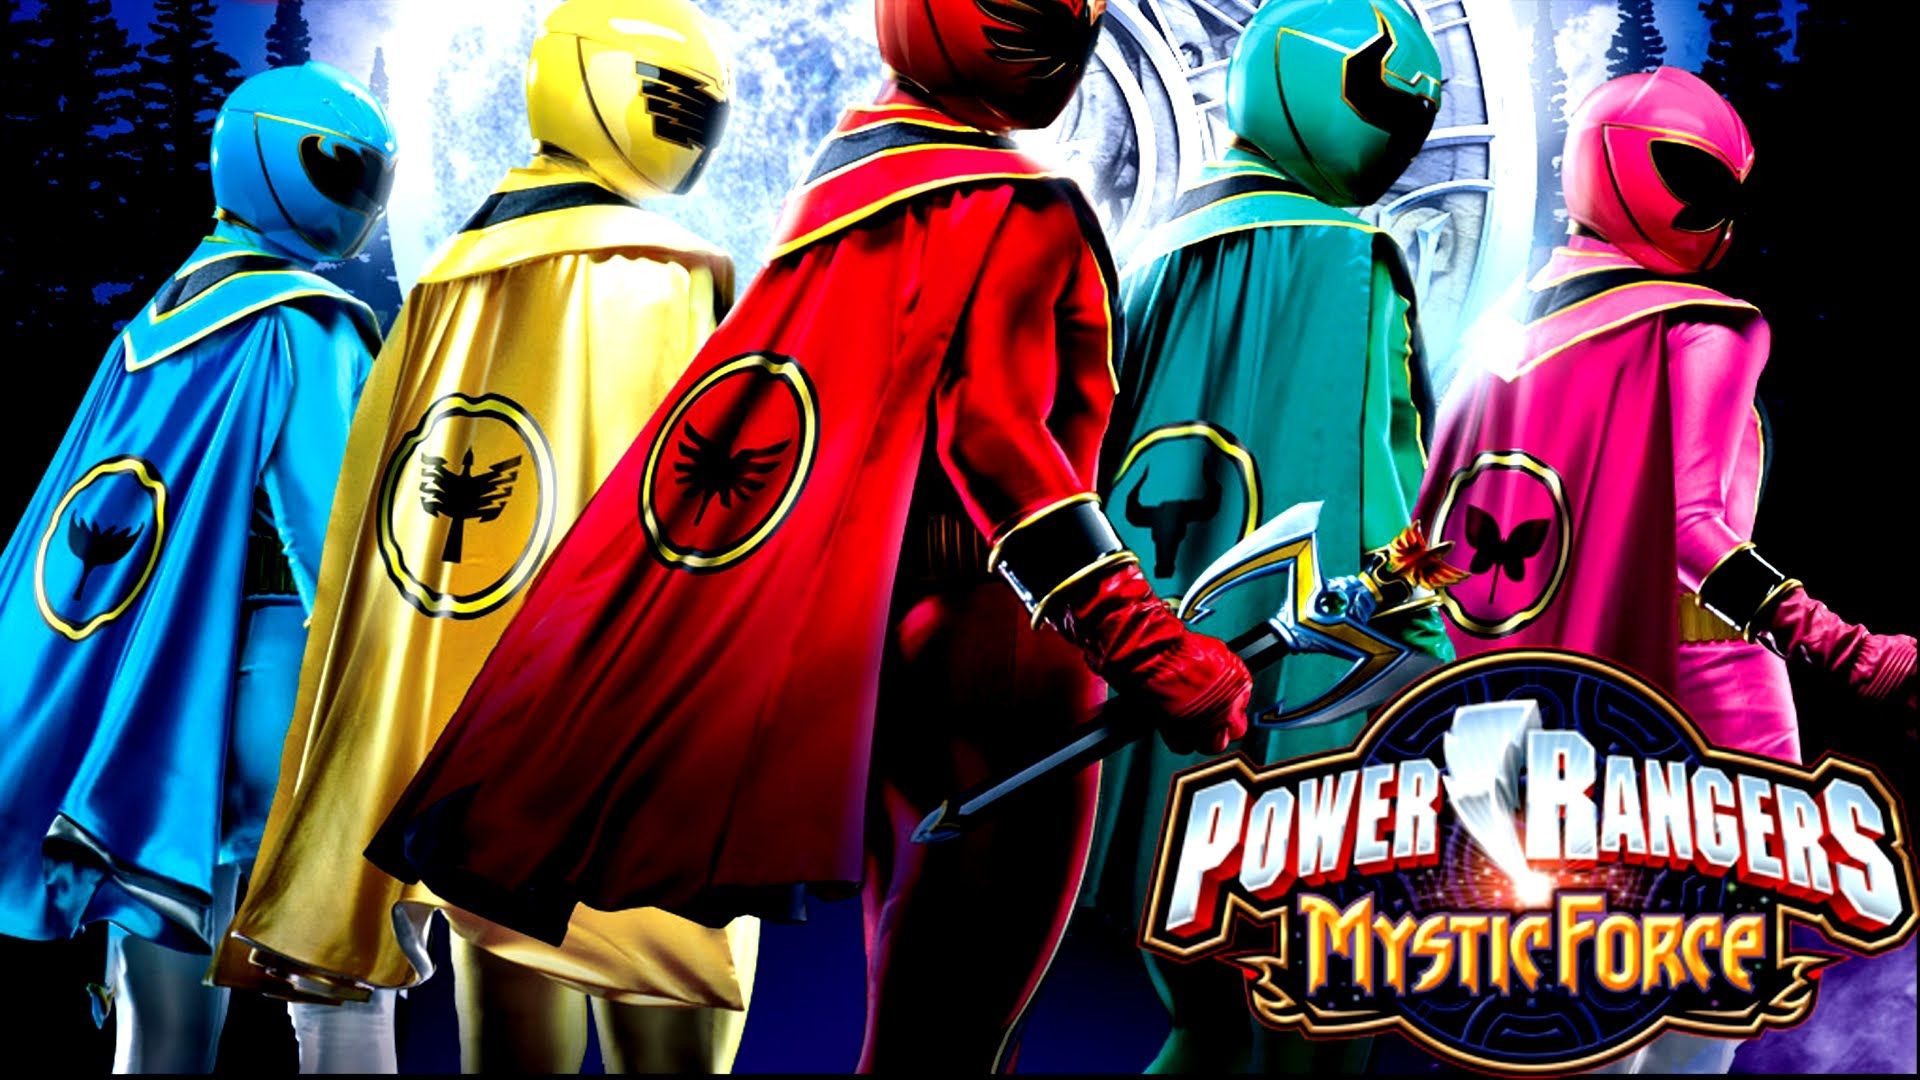 Power Rangers Mystic Force Wallpapers - Wallpaper Cave